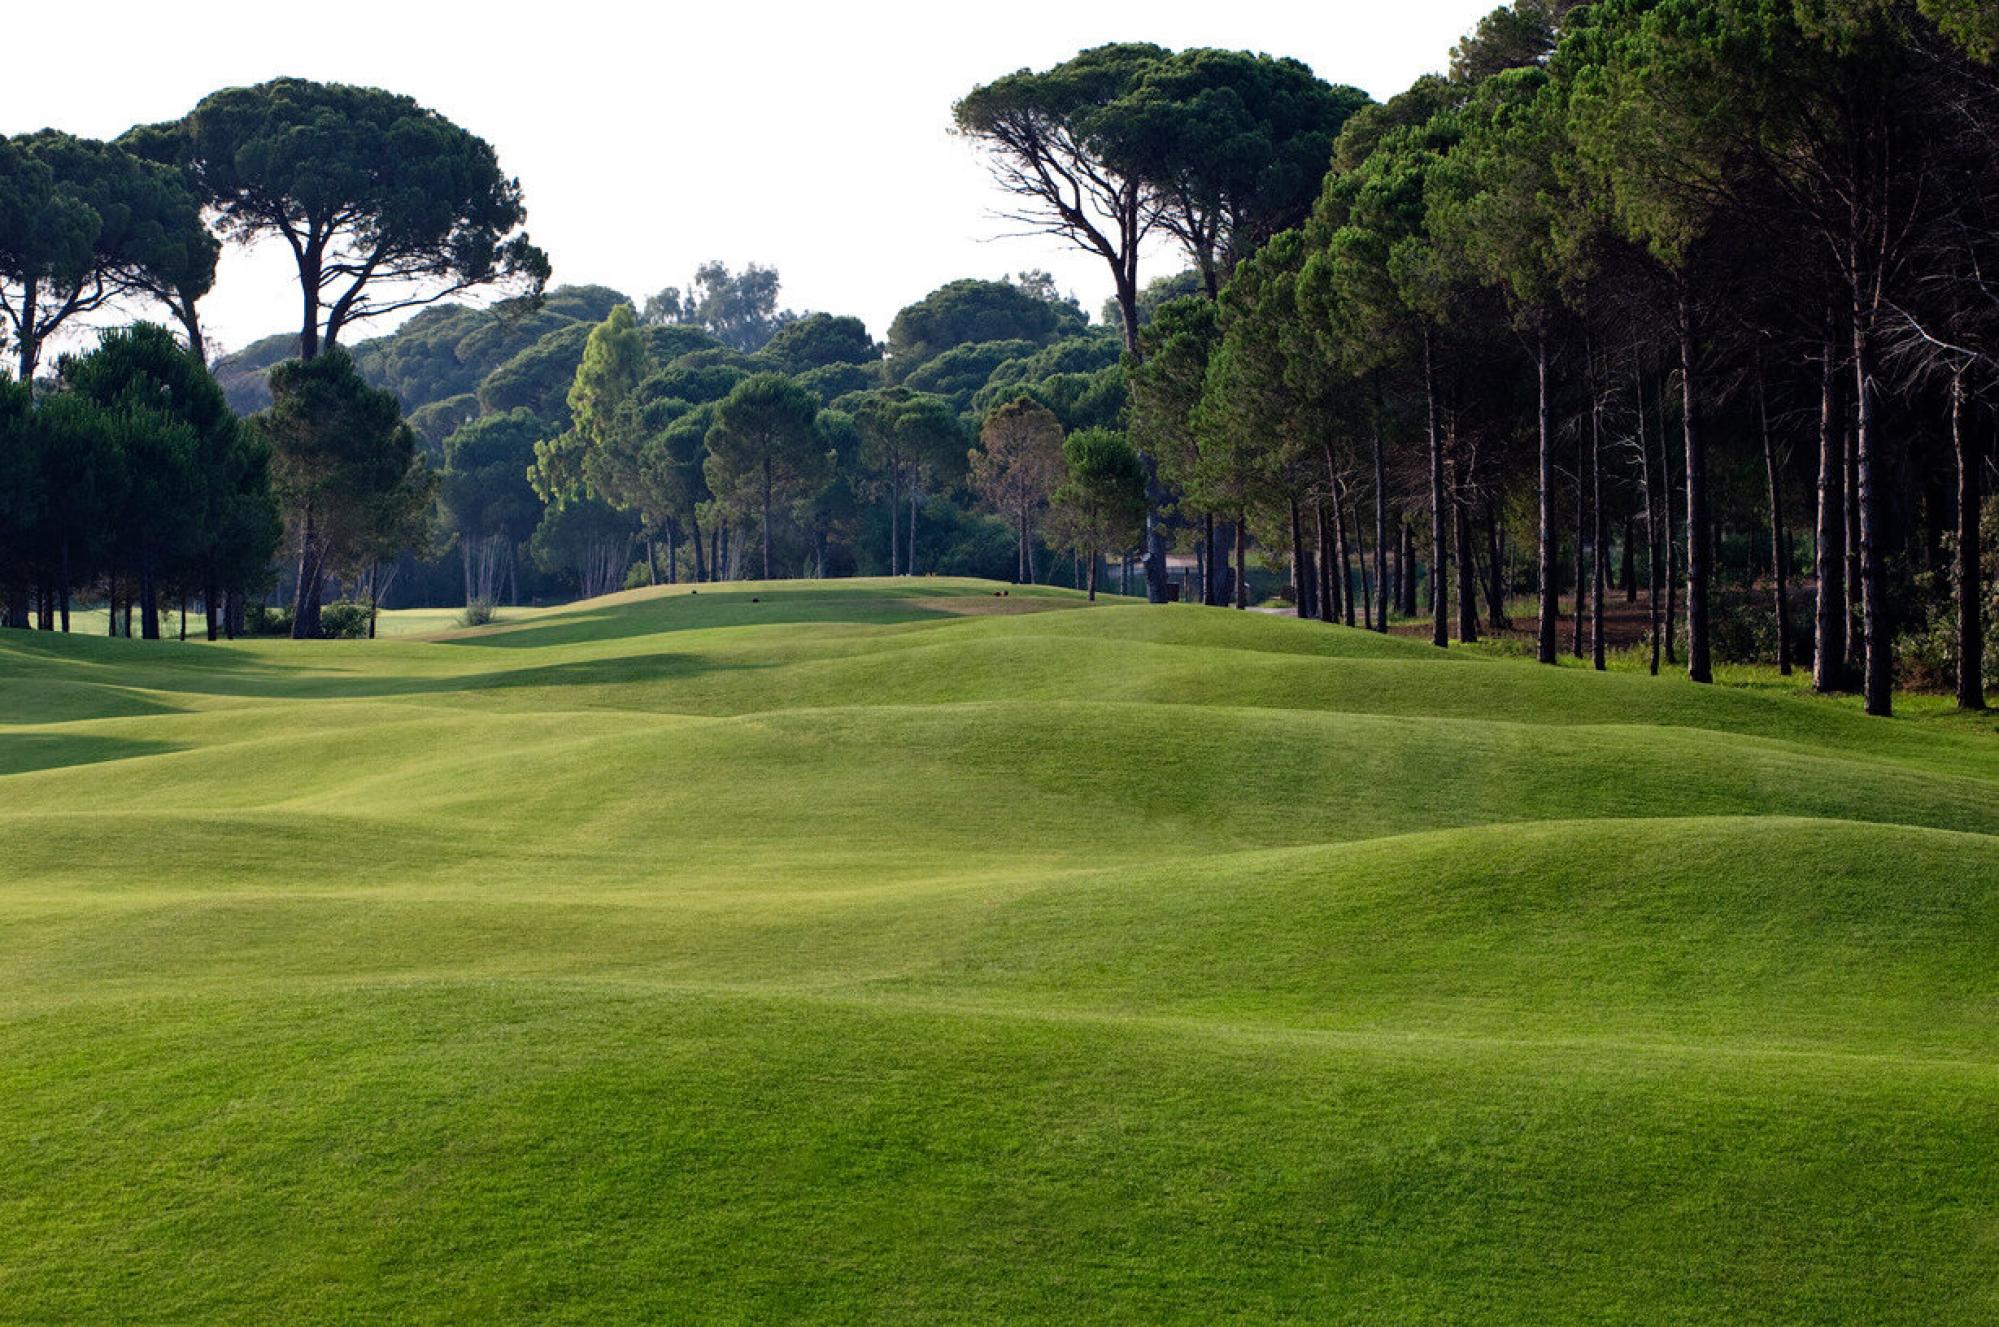 The Sueno Golf Club's scenic golf course within incredible Belek.